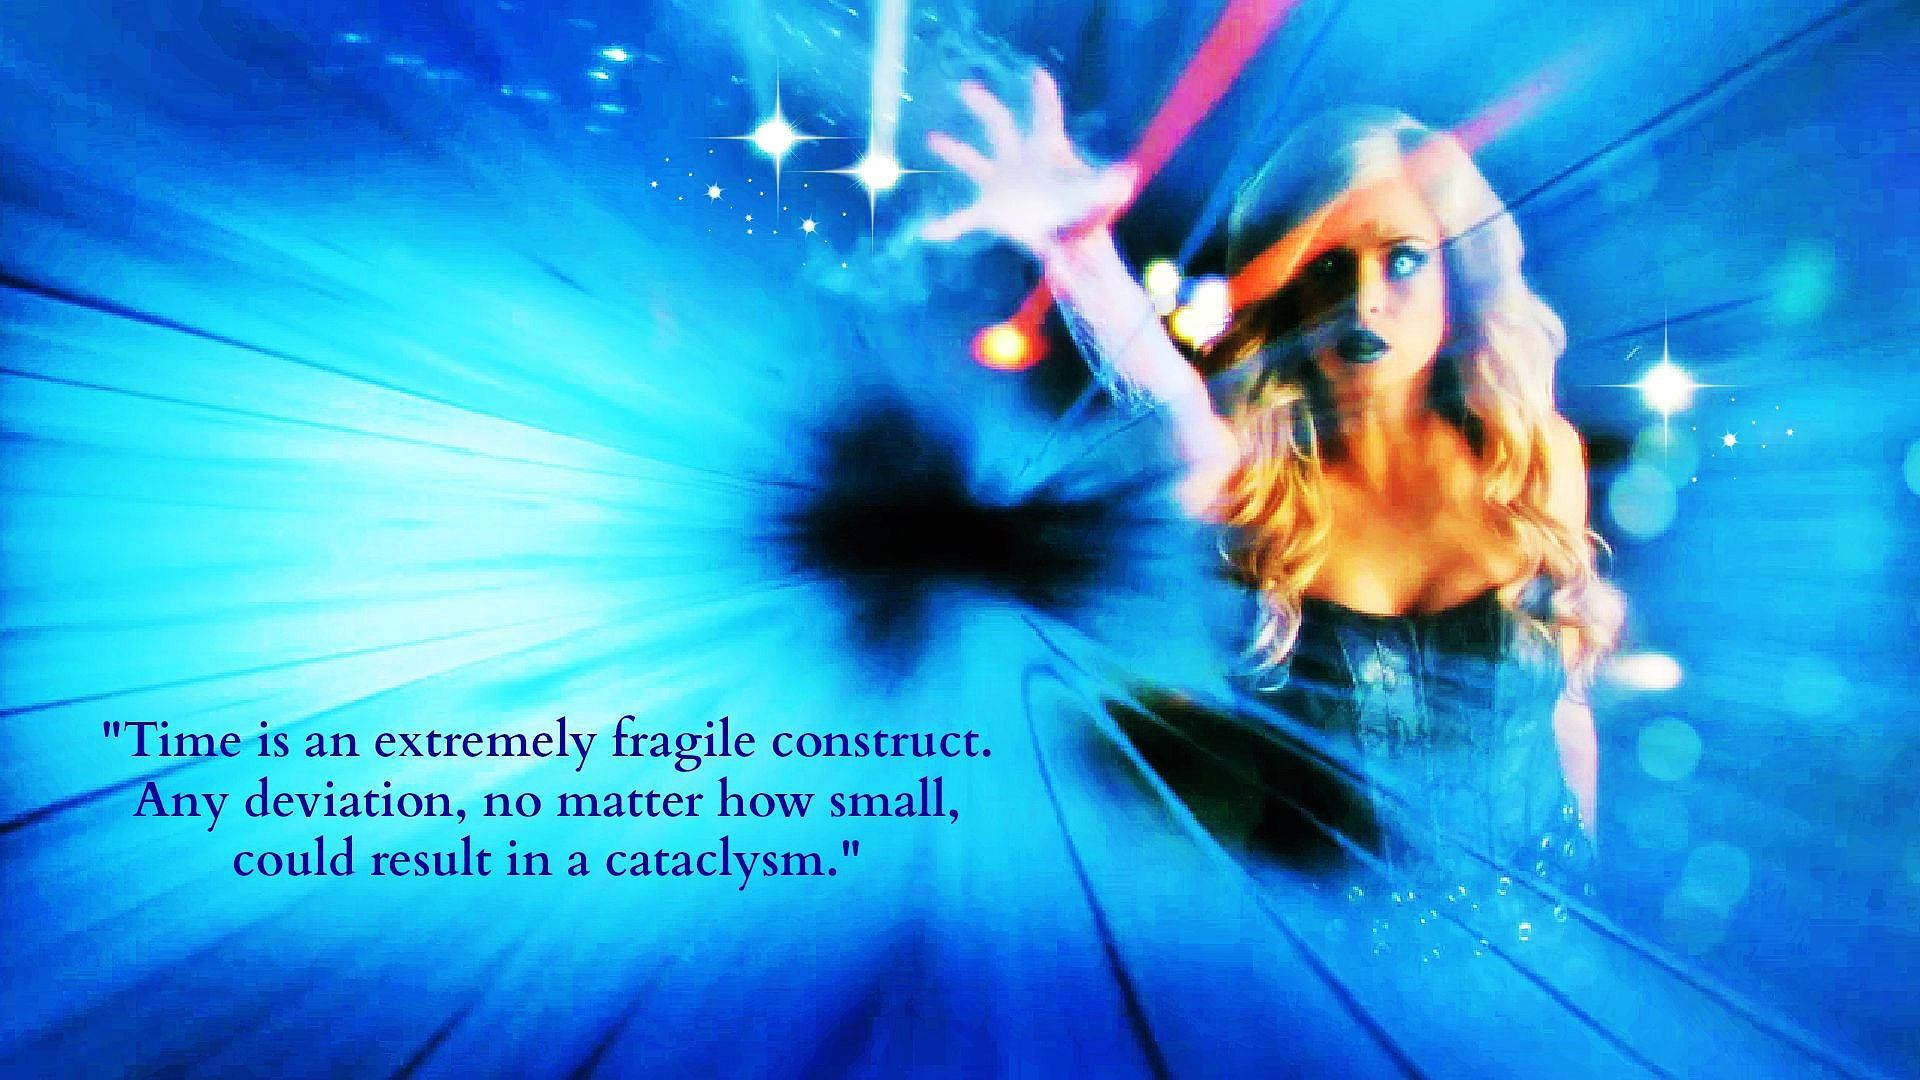 Killer Frost With Cataclysm Quote Background